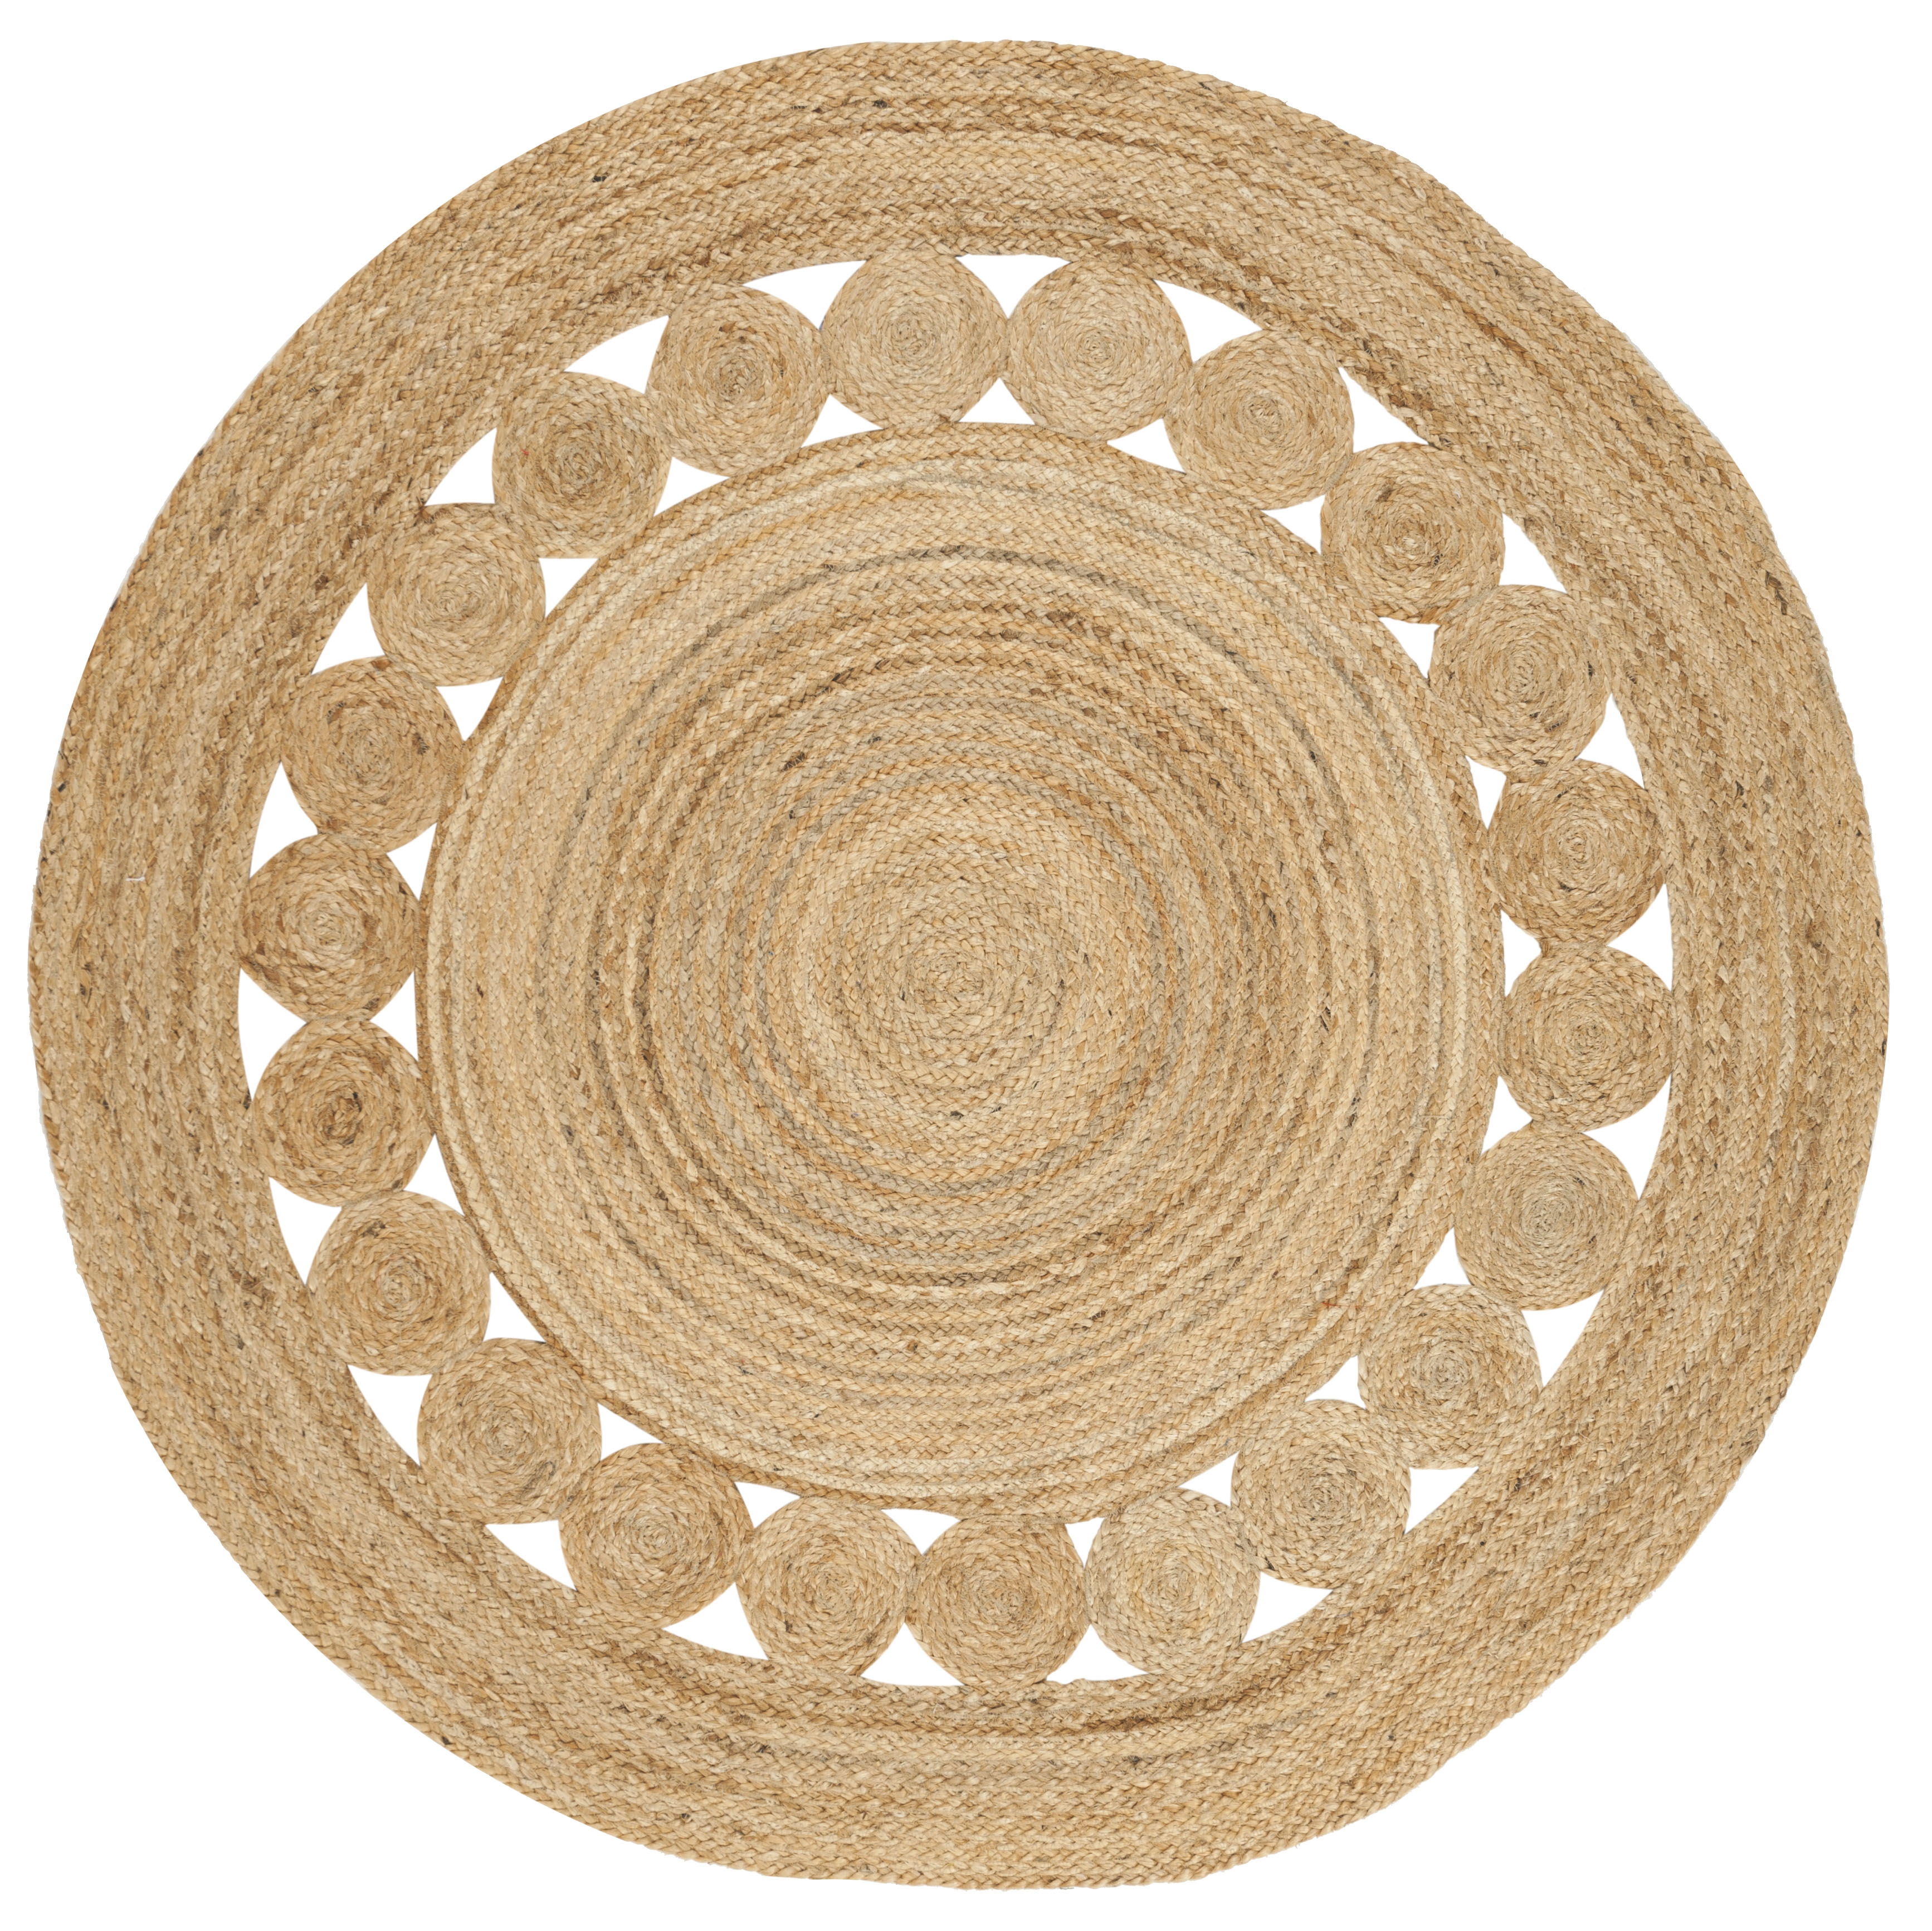 Arlo Home Hand Woven Area Rug, NF364A, Natural,  3' X 3' Round - Image 0